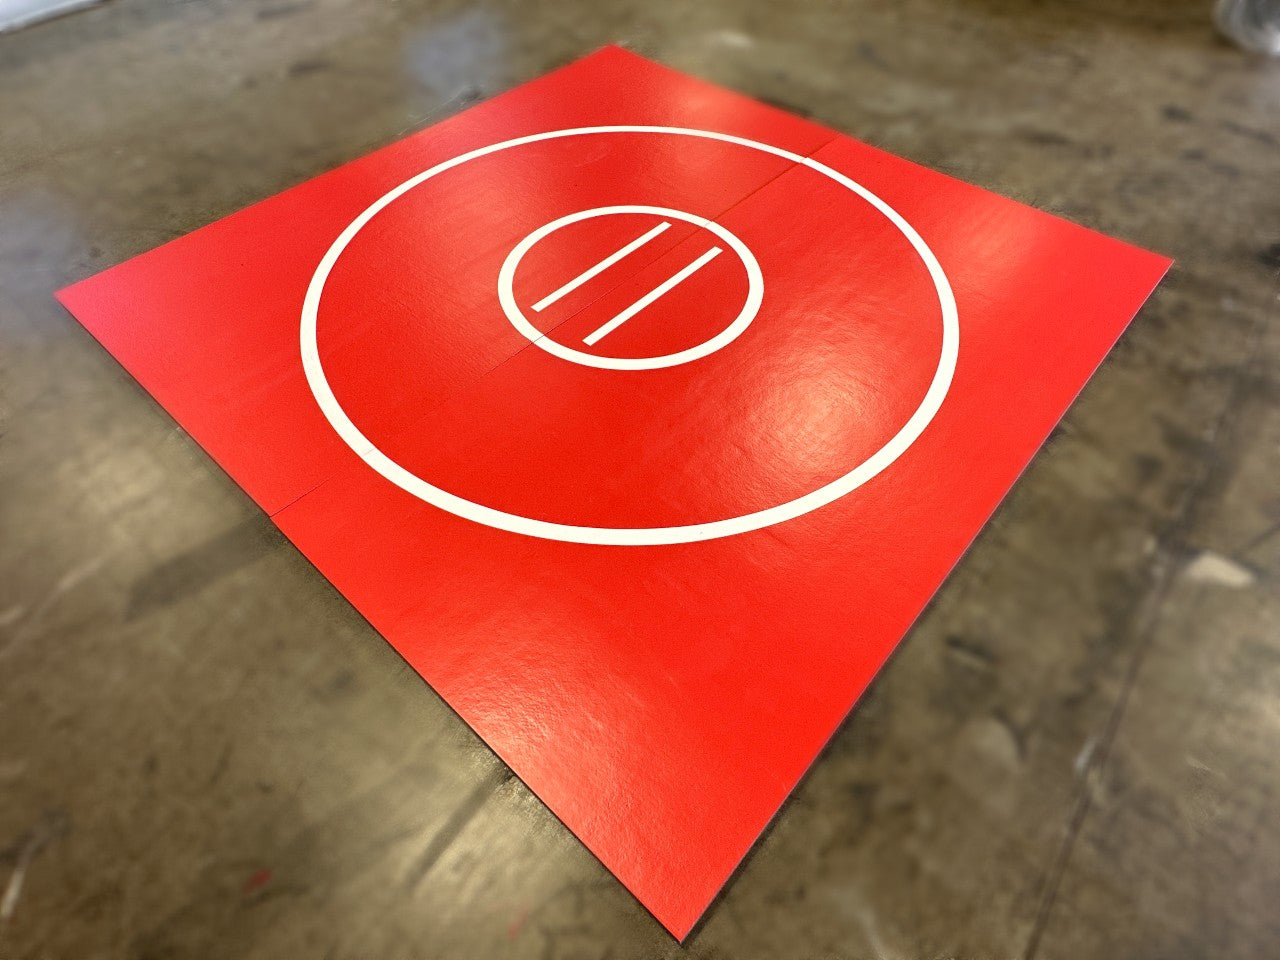 Clearance 10' x 10' x 1 3/8" Roll-Up Wrestling Mat Red with White Circles